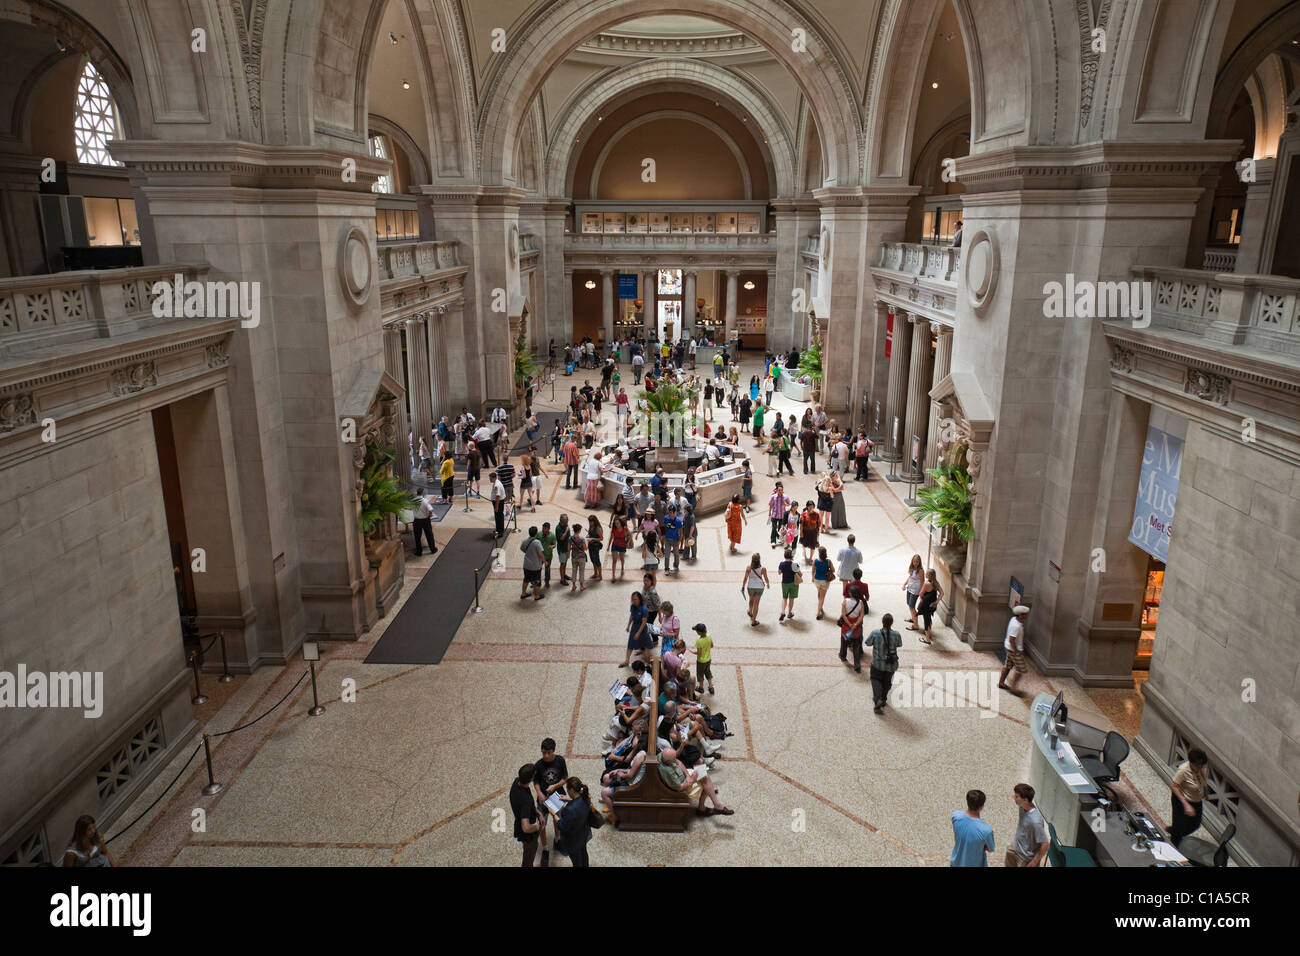 Entrance lobby to Metropolitan Museum of Art in New York City Stock Photo